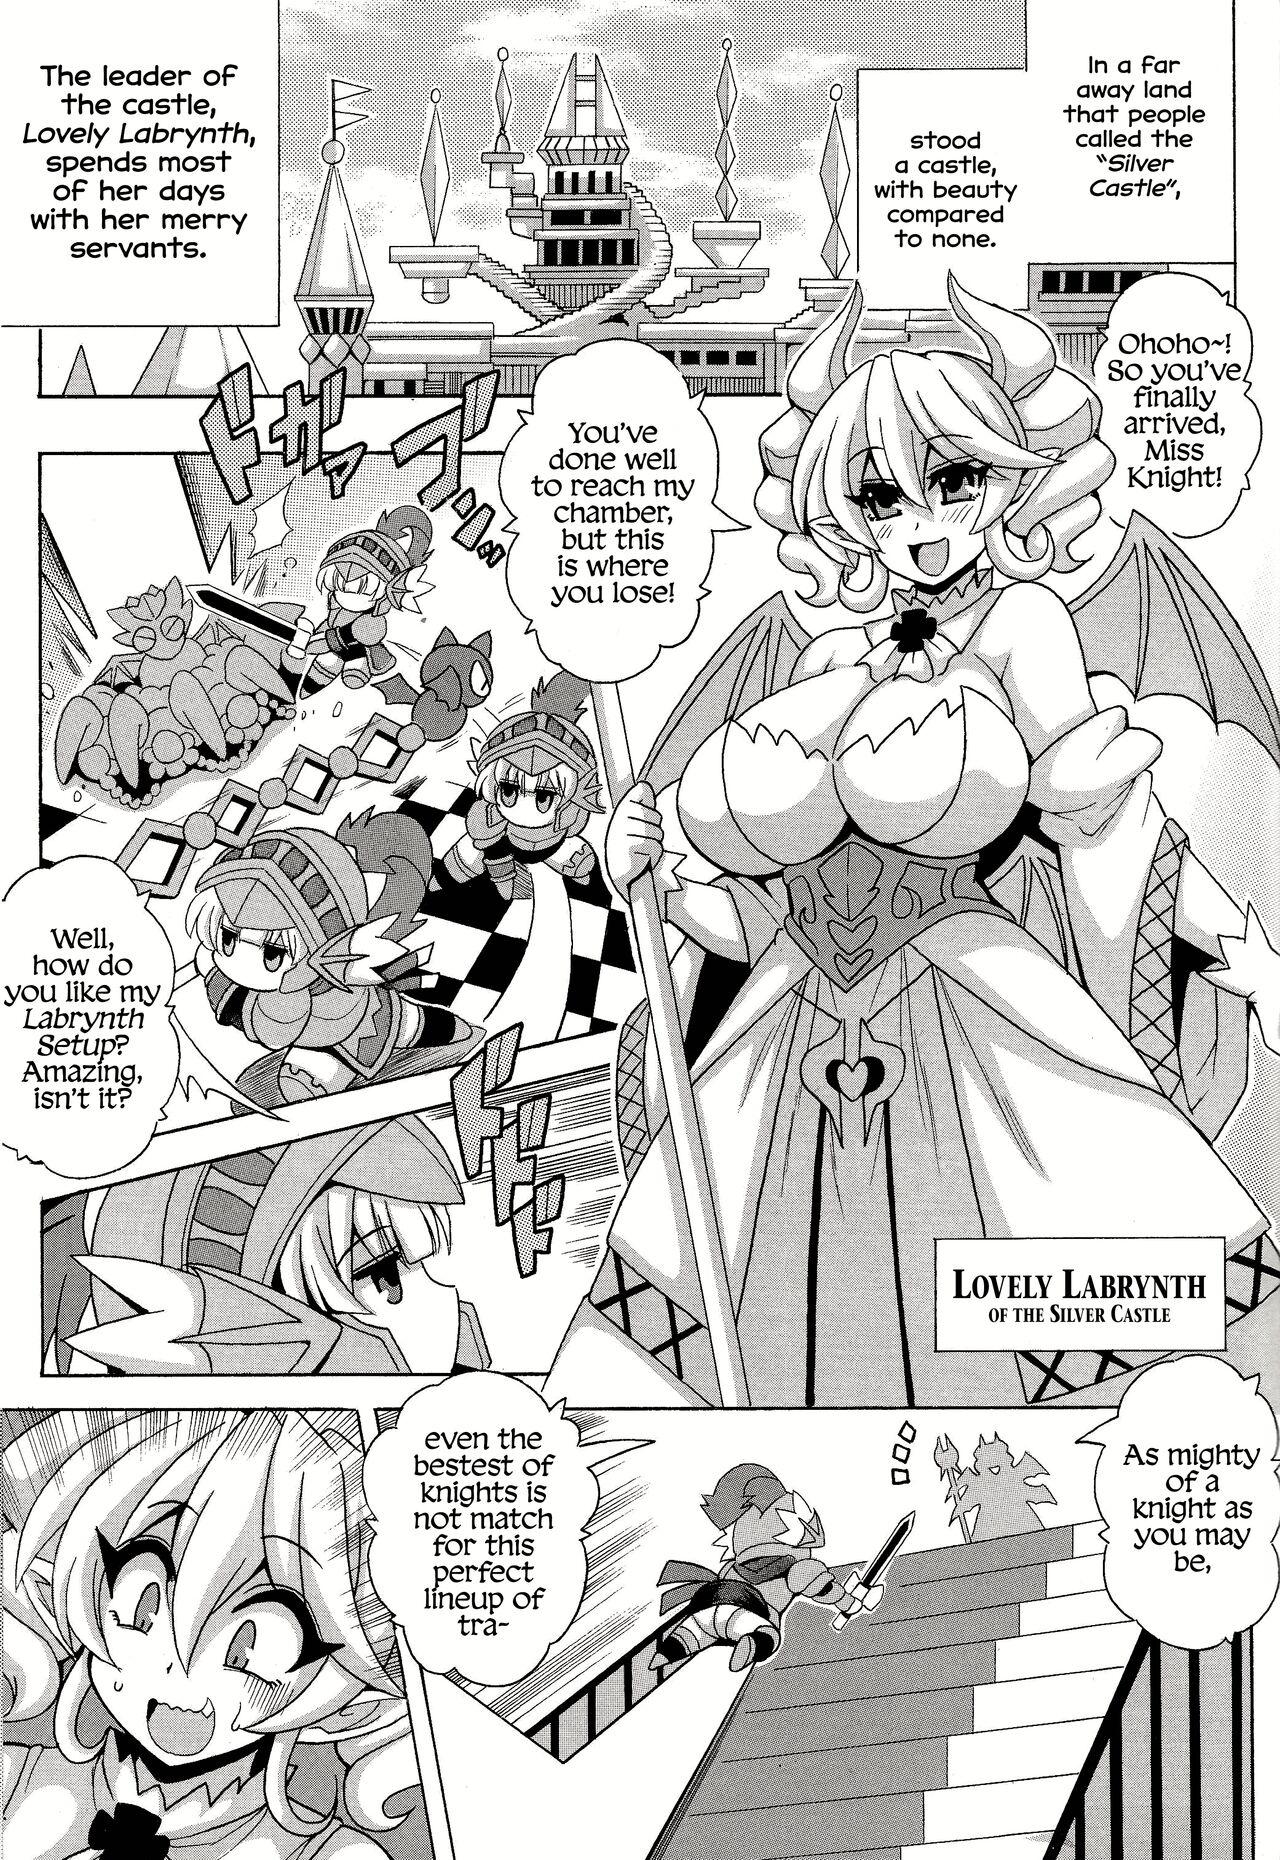 Eating LABRYNTH MILK - Yu gi oh Jerking - Page 2